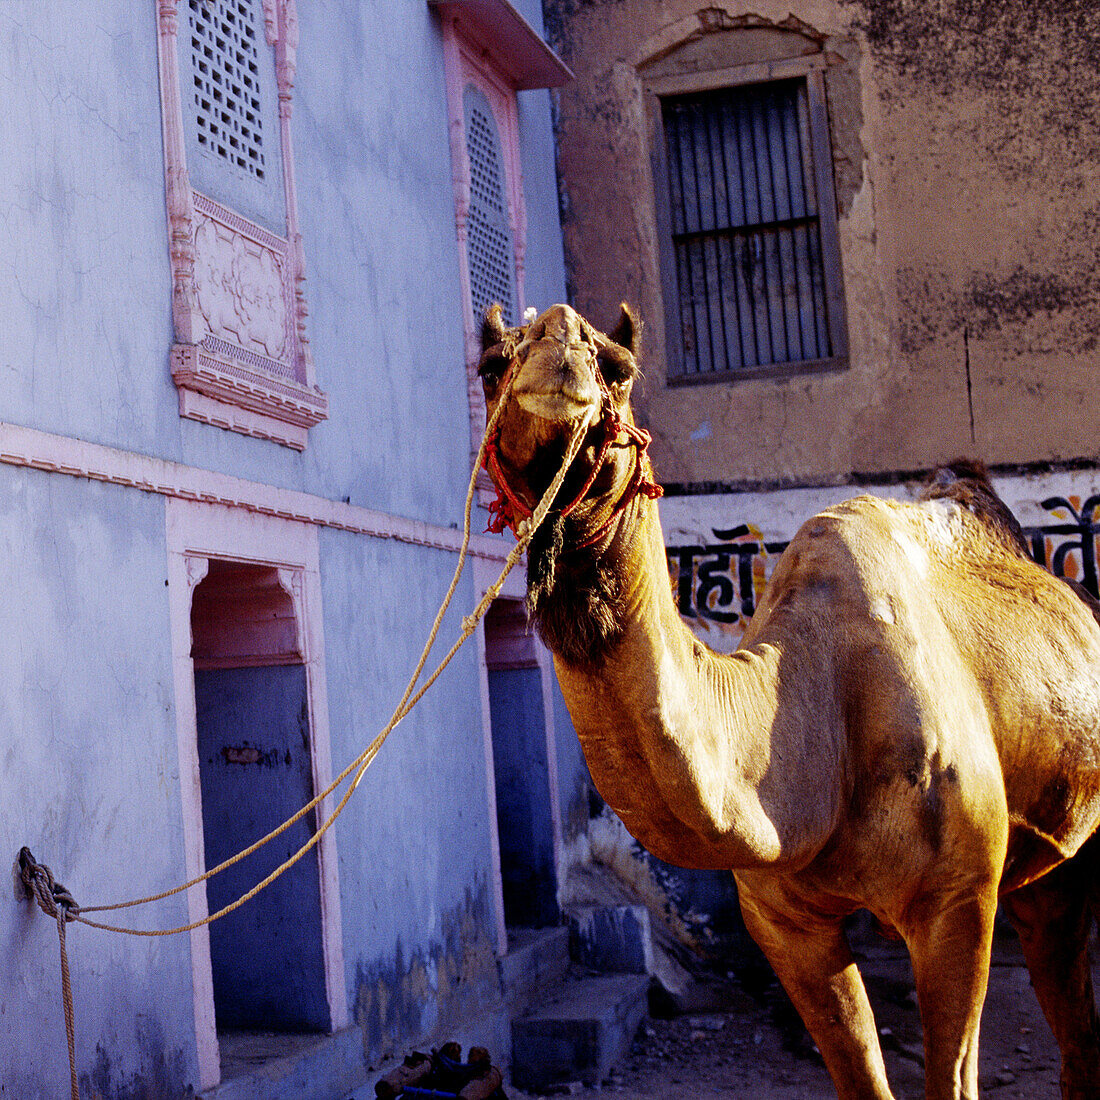 One humped camel tied to a wall of a blue and pink painted building.